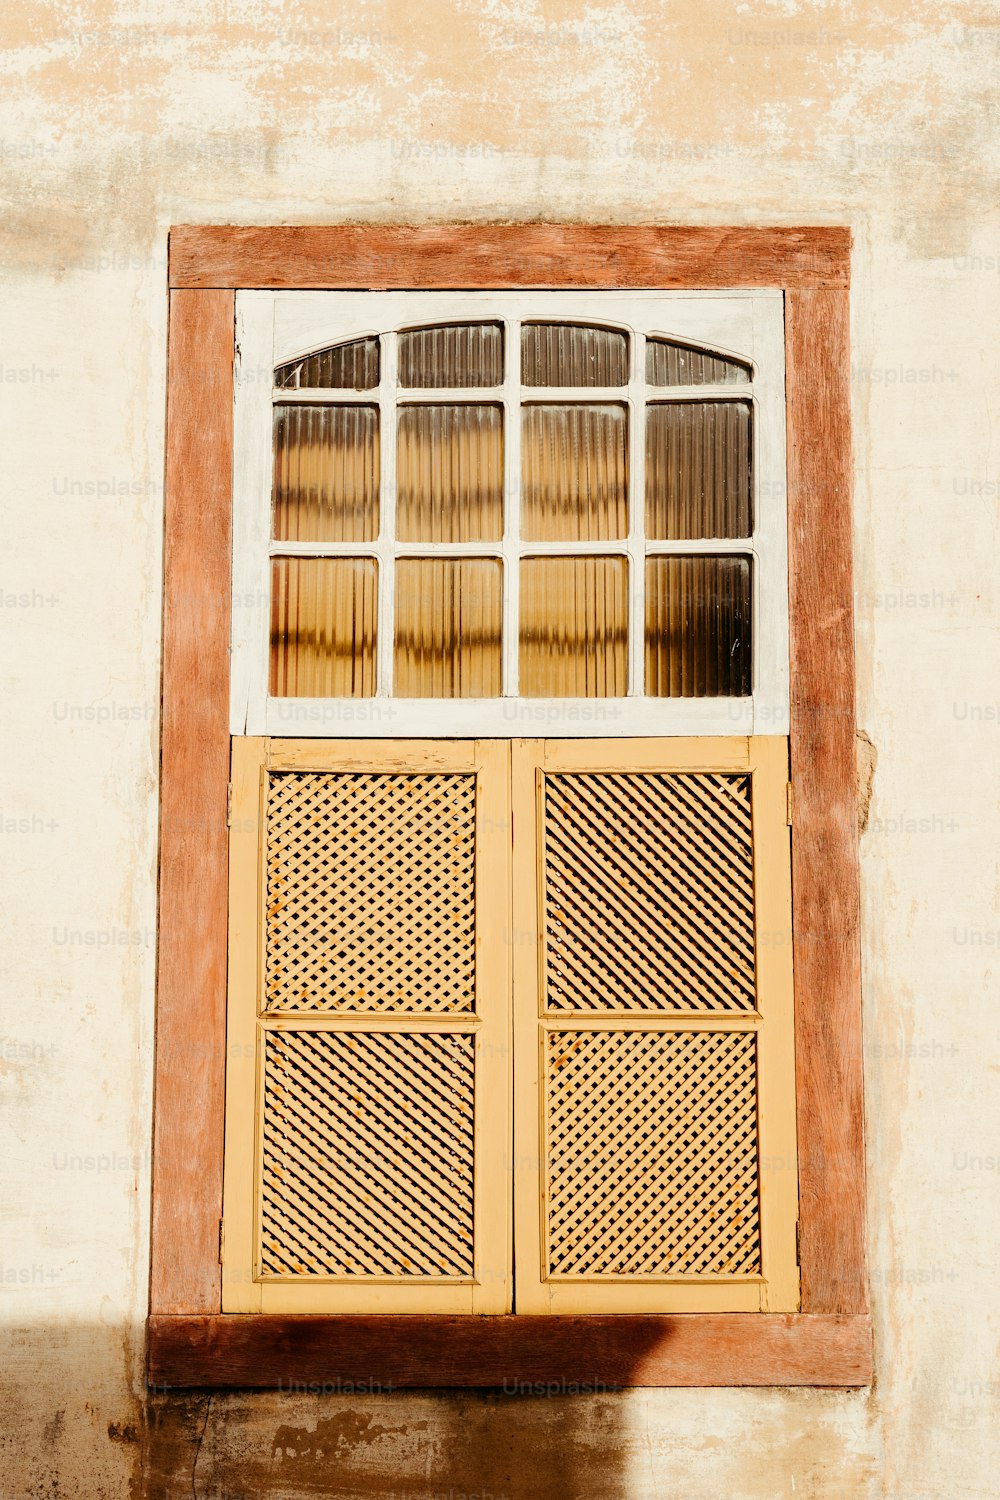 a window on a wall with a wooden frame